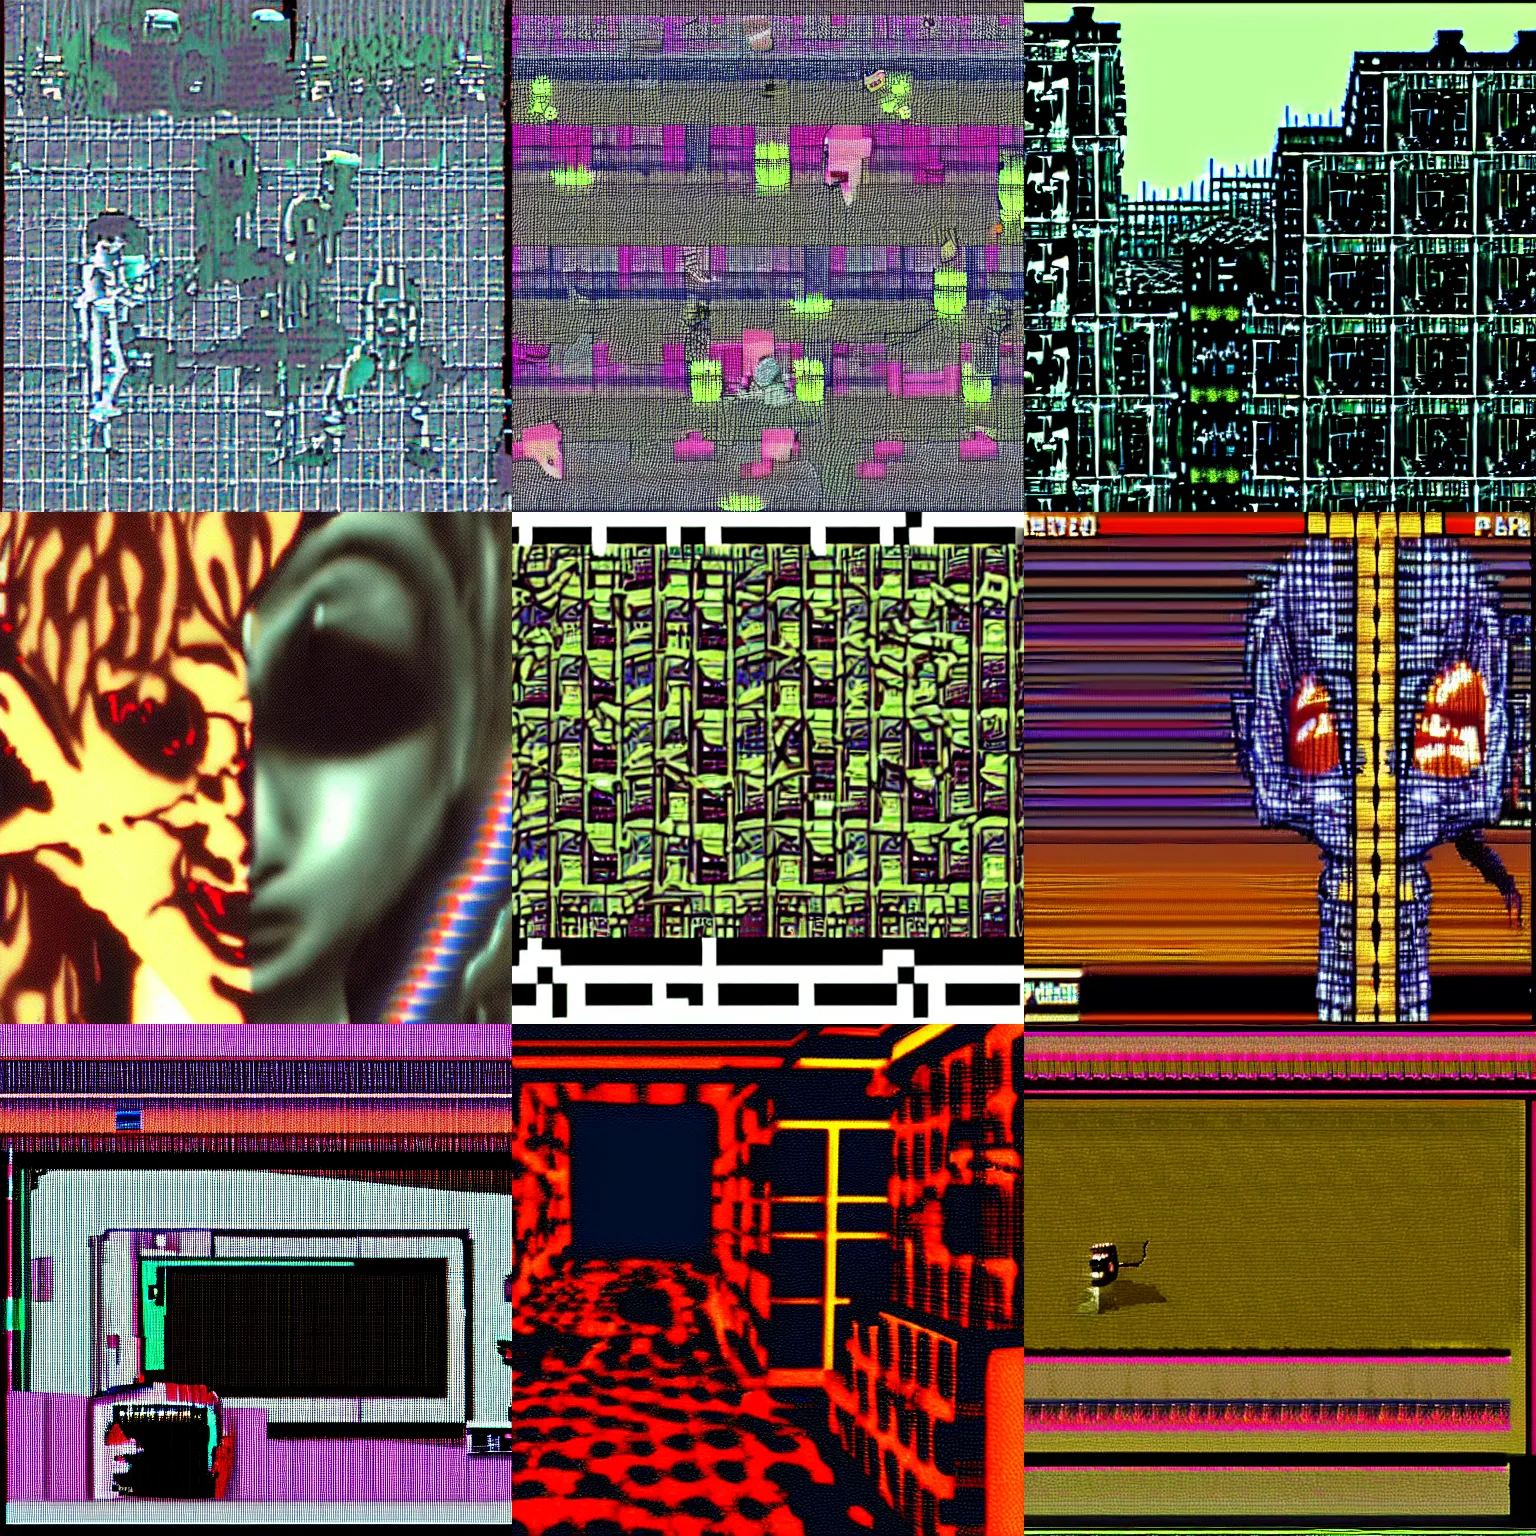 Prompt: screenshot from ps 1 horror game, psx, playstation one, tv scanlines, glitches, junji ito character design and abstract patterns